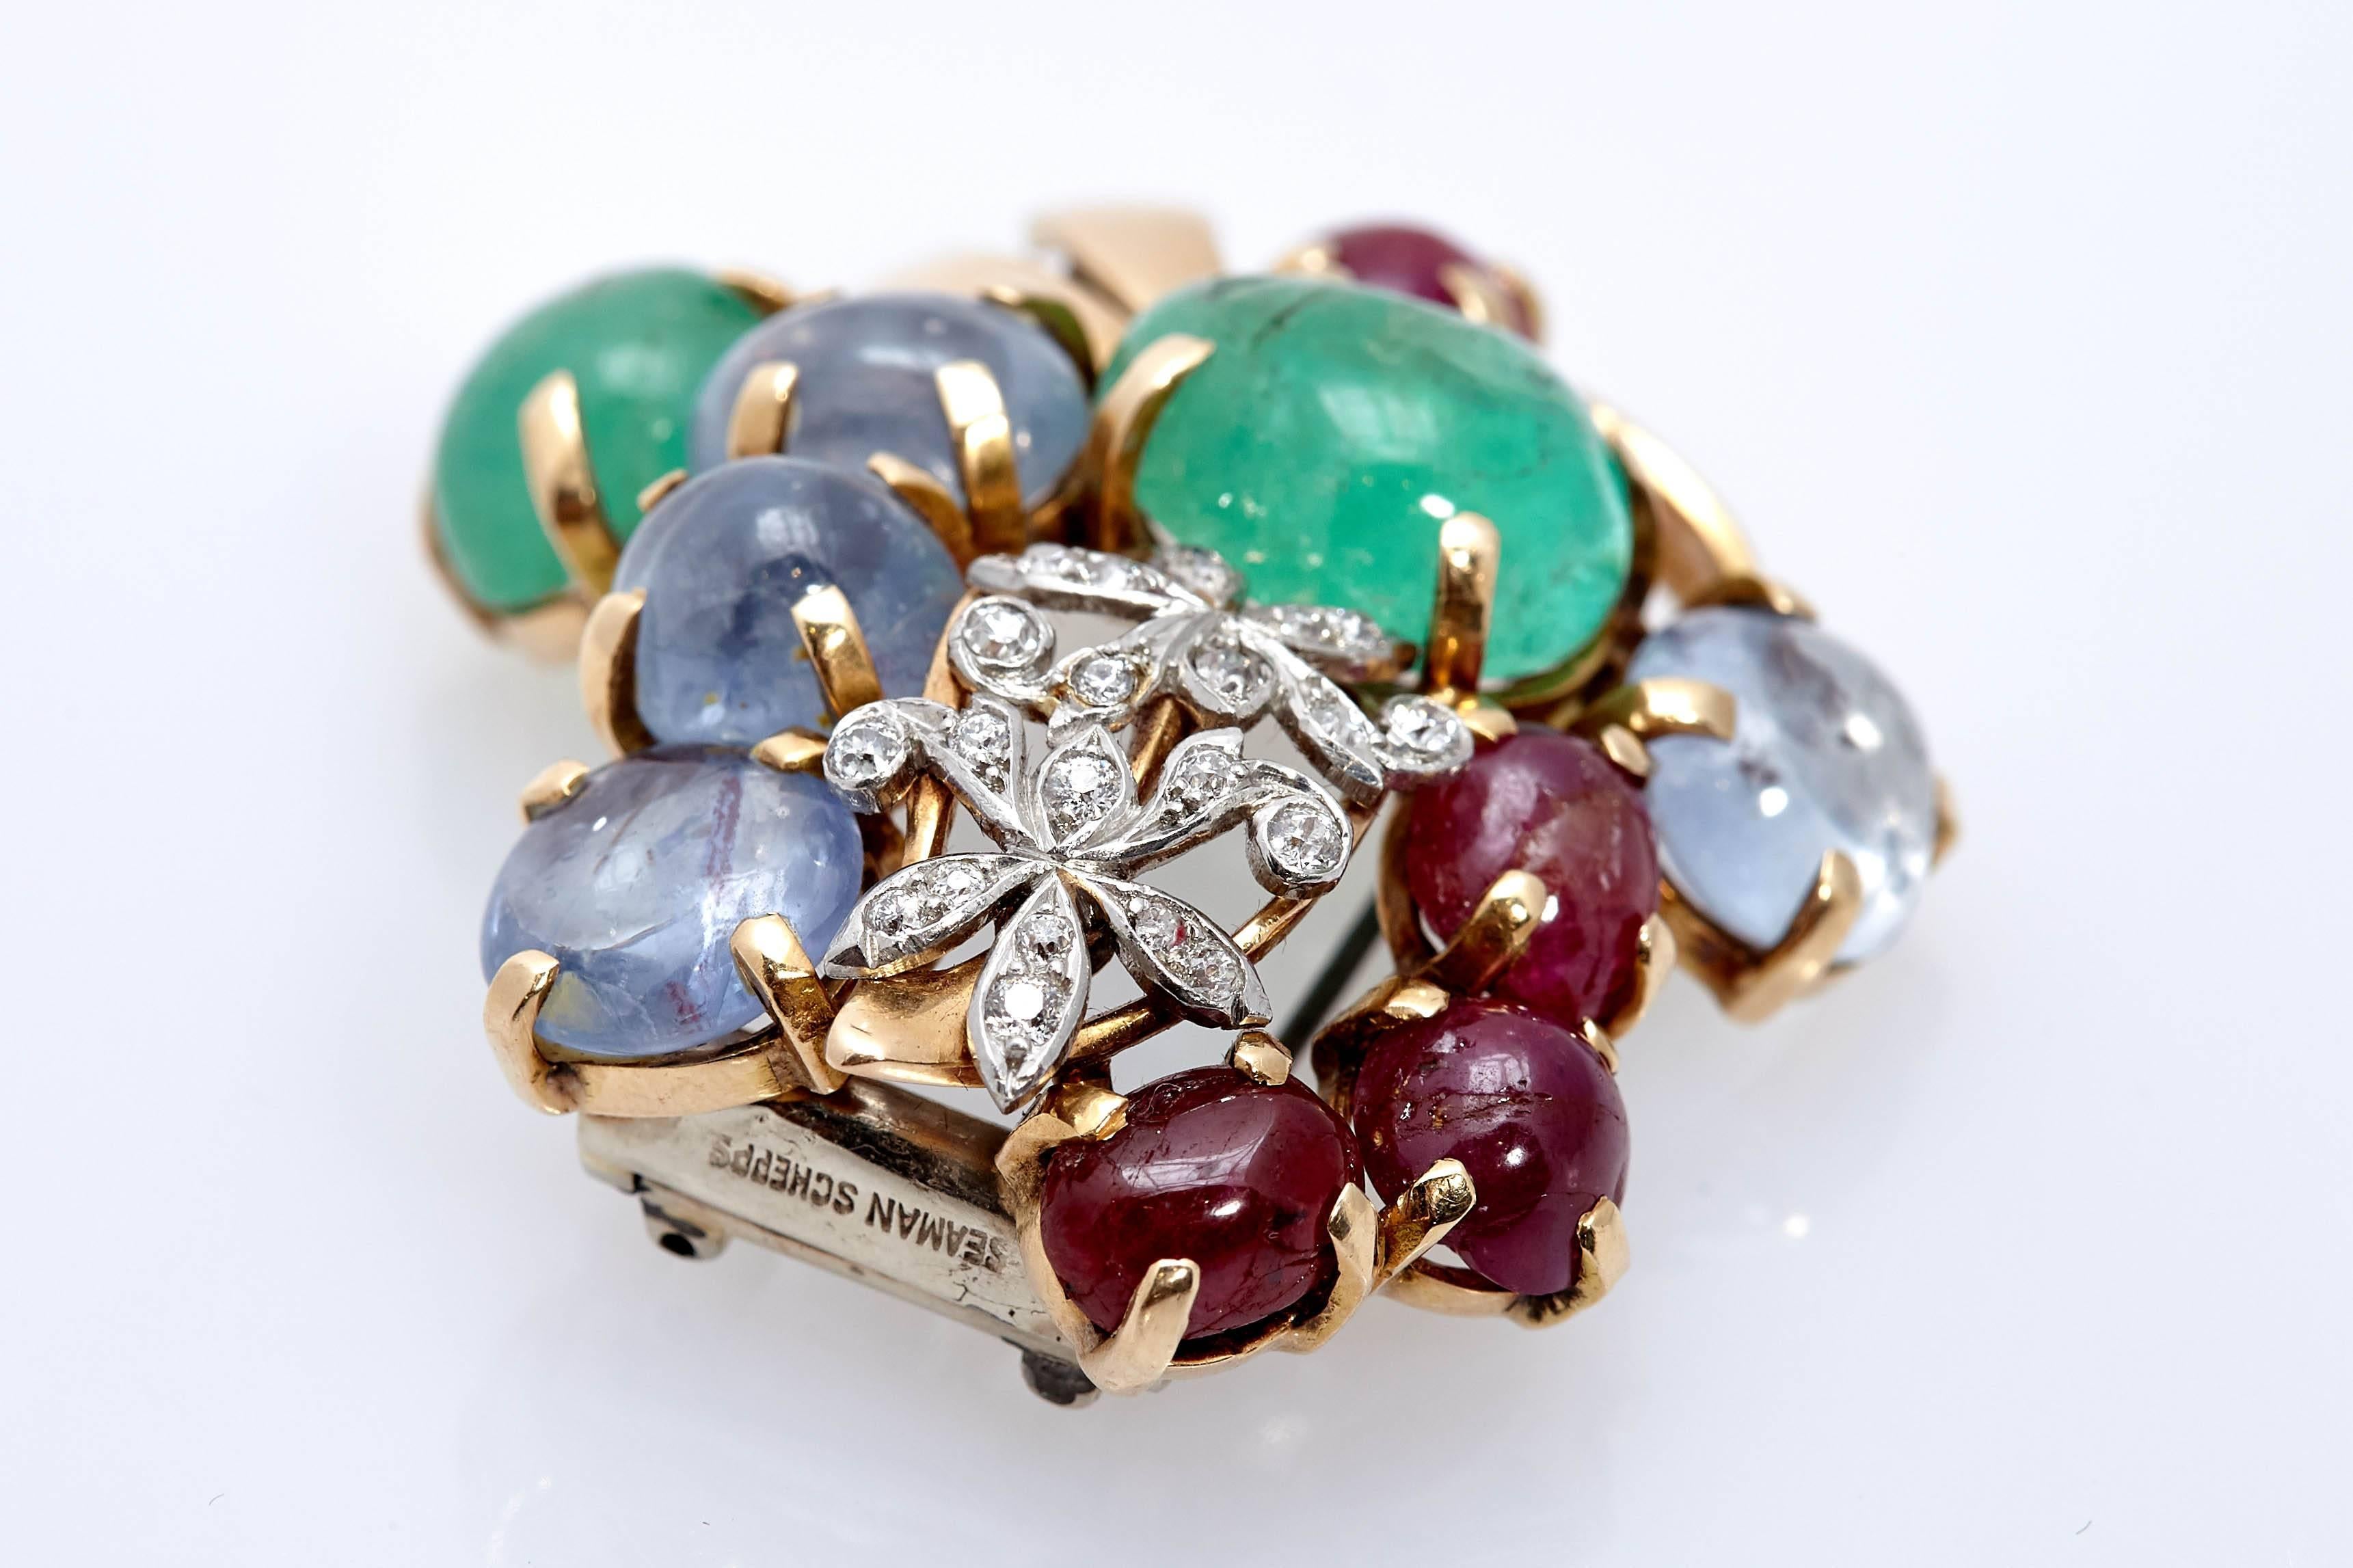 A Seaman Schepps floral brooch in 18kt yellow gold with cabochon emerald, sapphires and rubies, highlighted with diamonds. Made in the United States, circa 1970s.